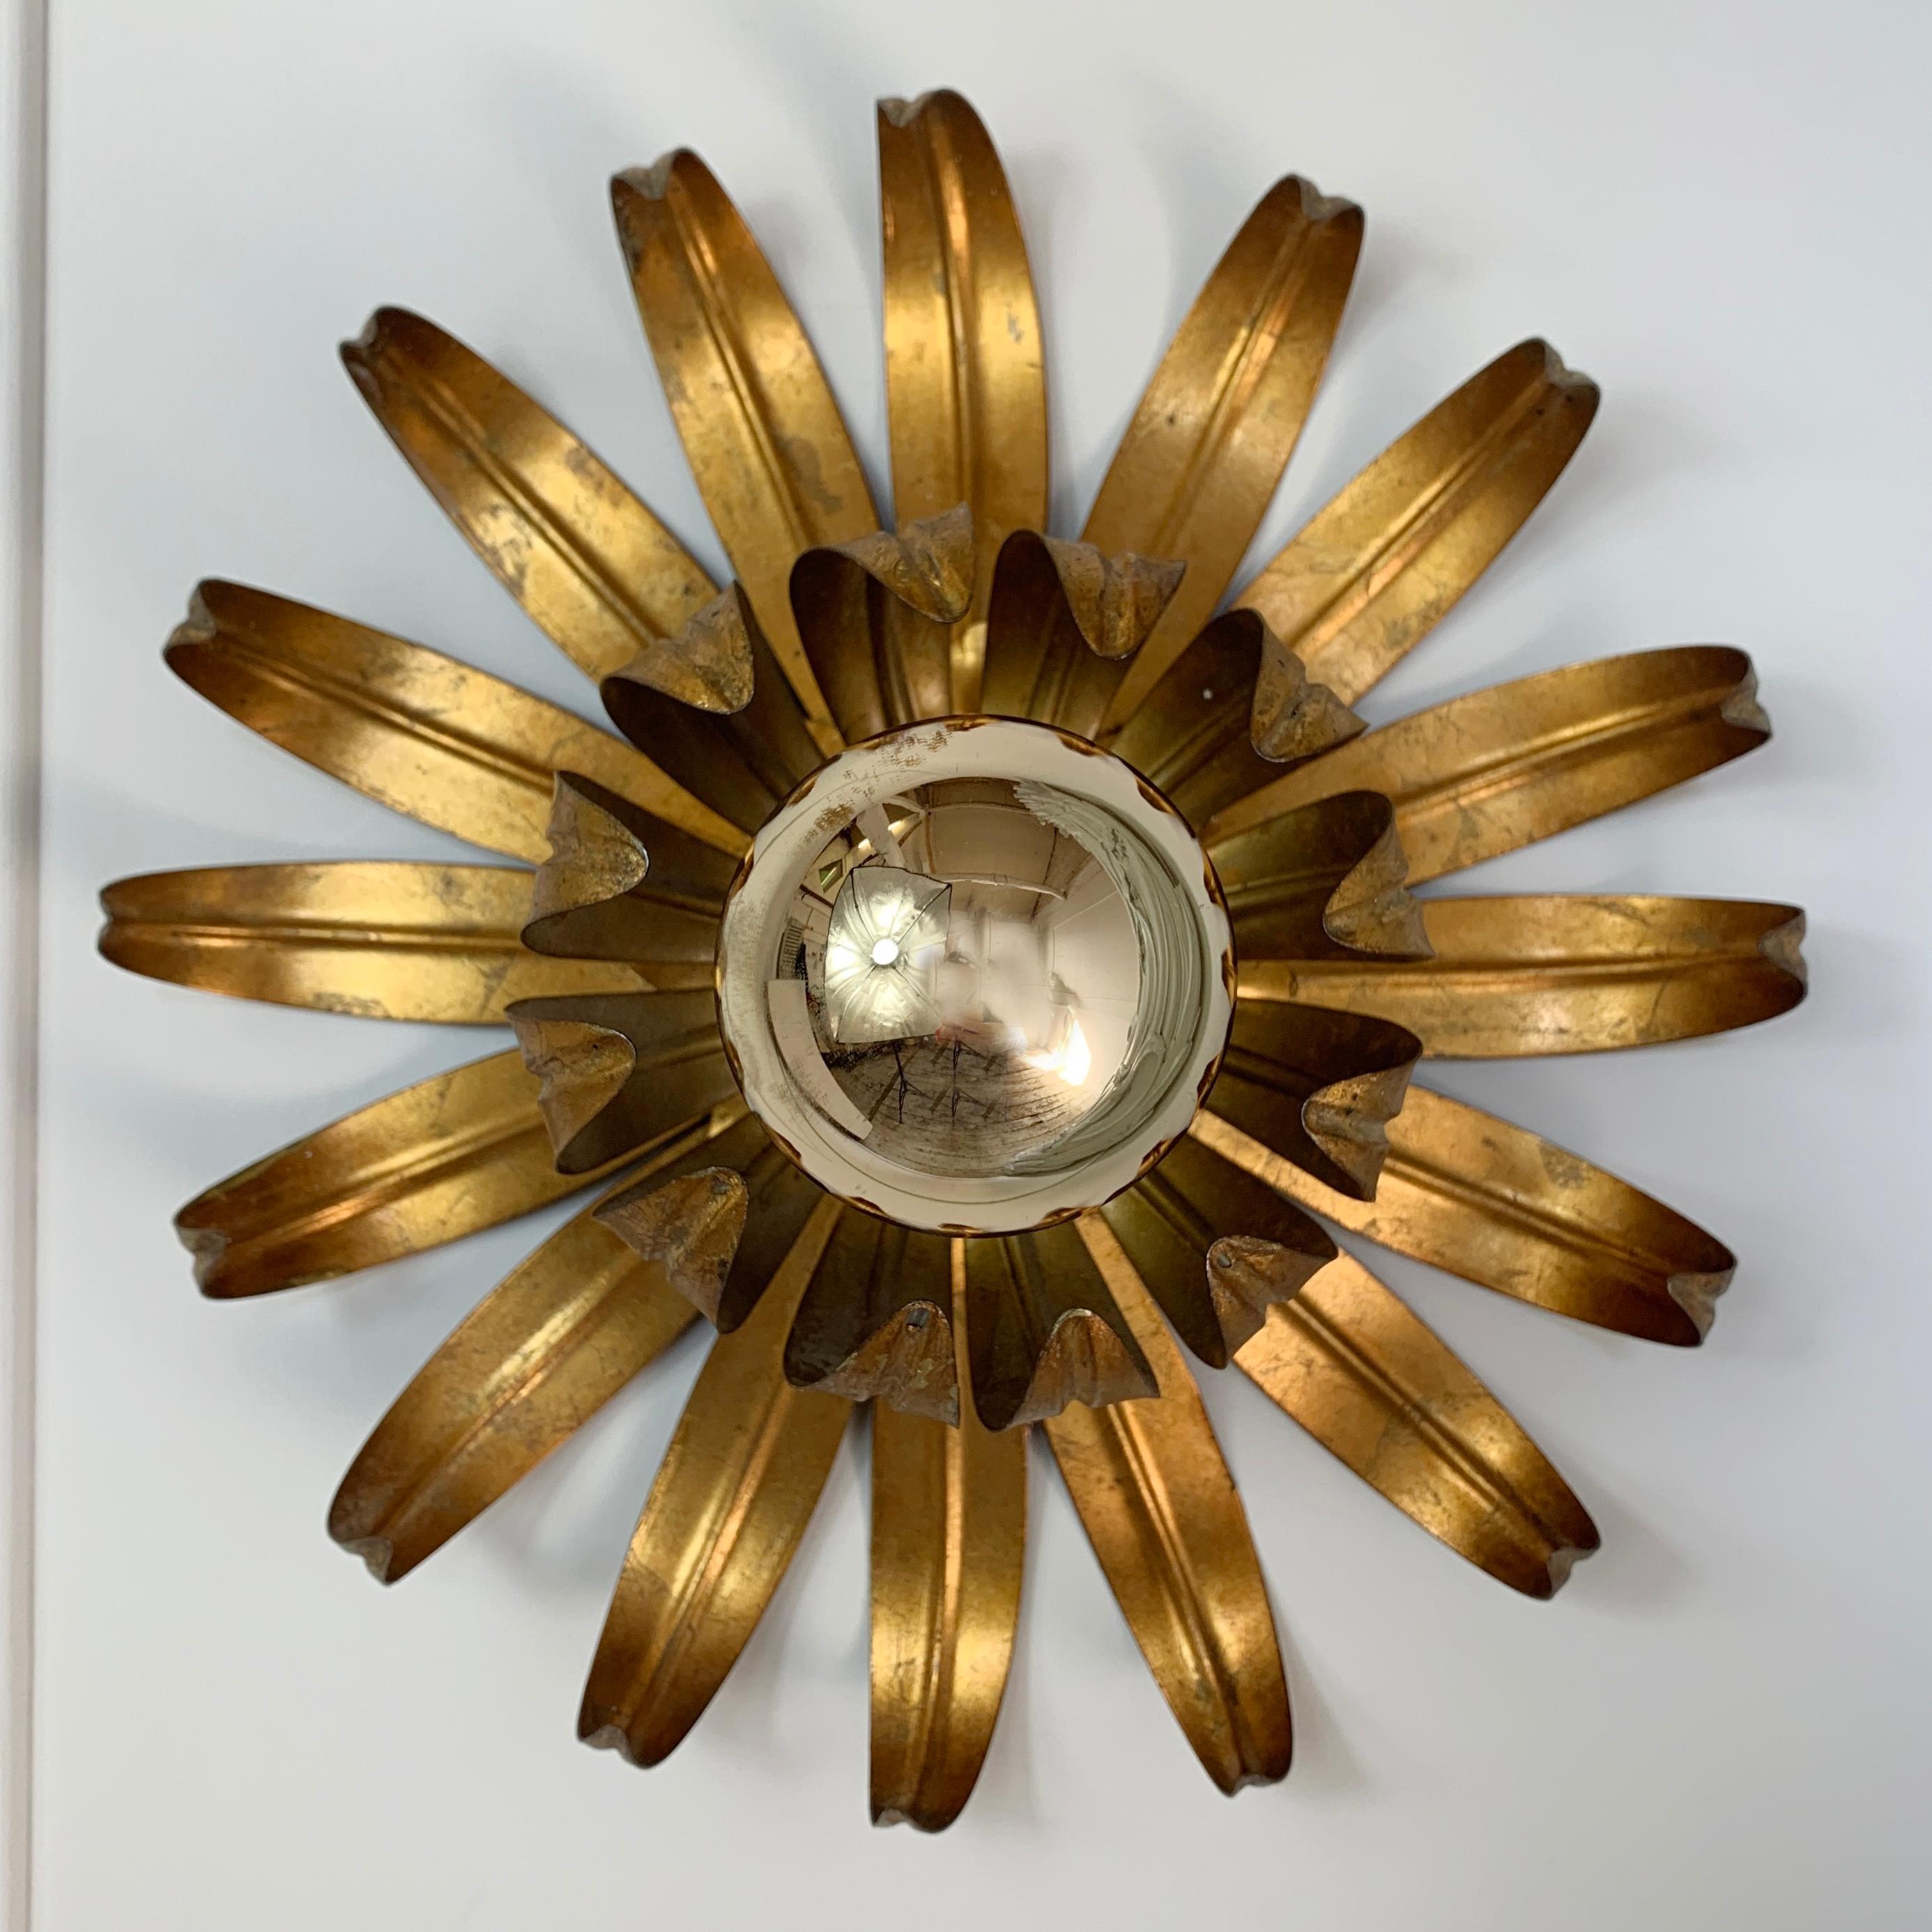 Gilt metal flower shaped ceiling light
Flower flush light attributed to Maison Jansen,
circa 1970s
The light has a hook on the back to attach to the ceiling
The light is 29cm width, 12cm depth
We have 2 of these available, priced individually